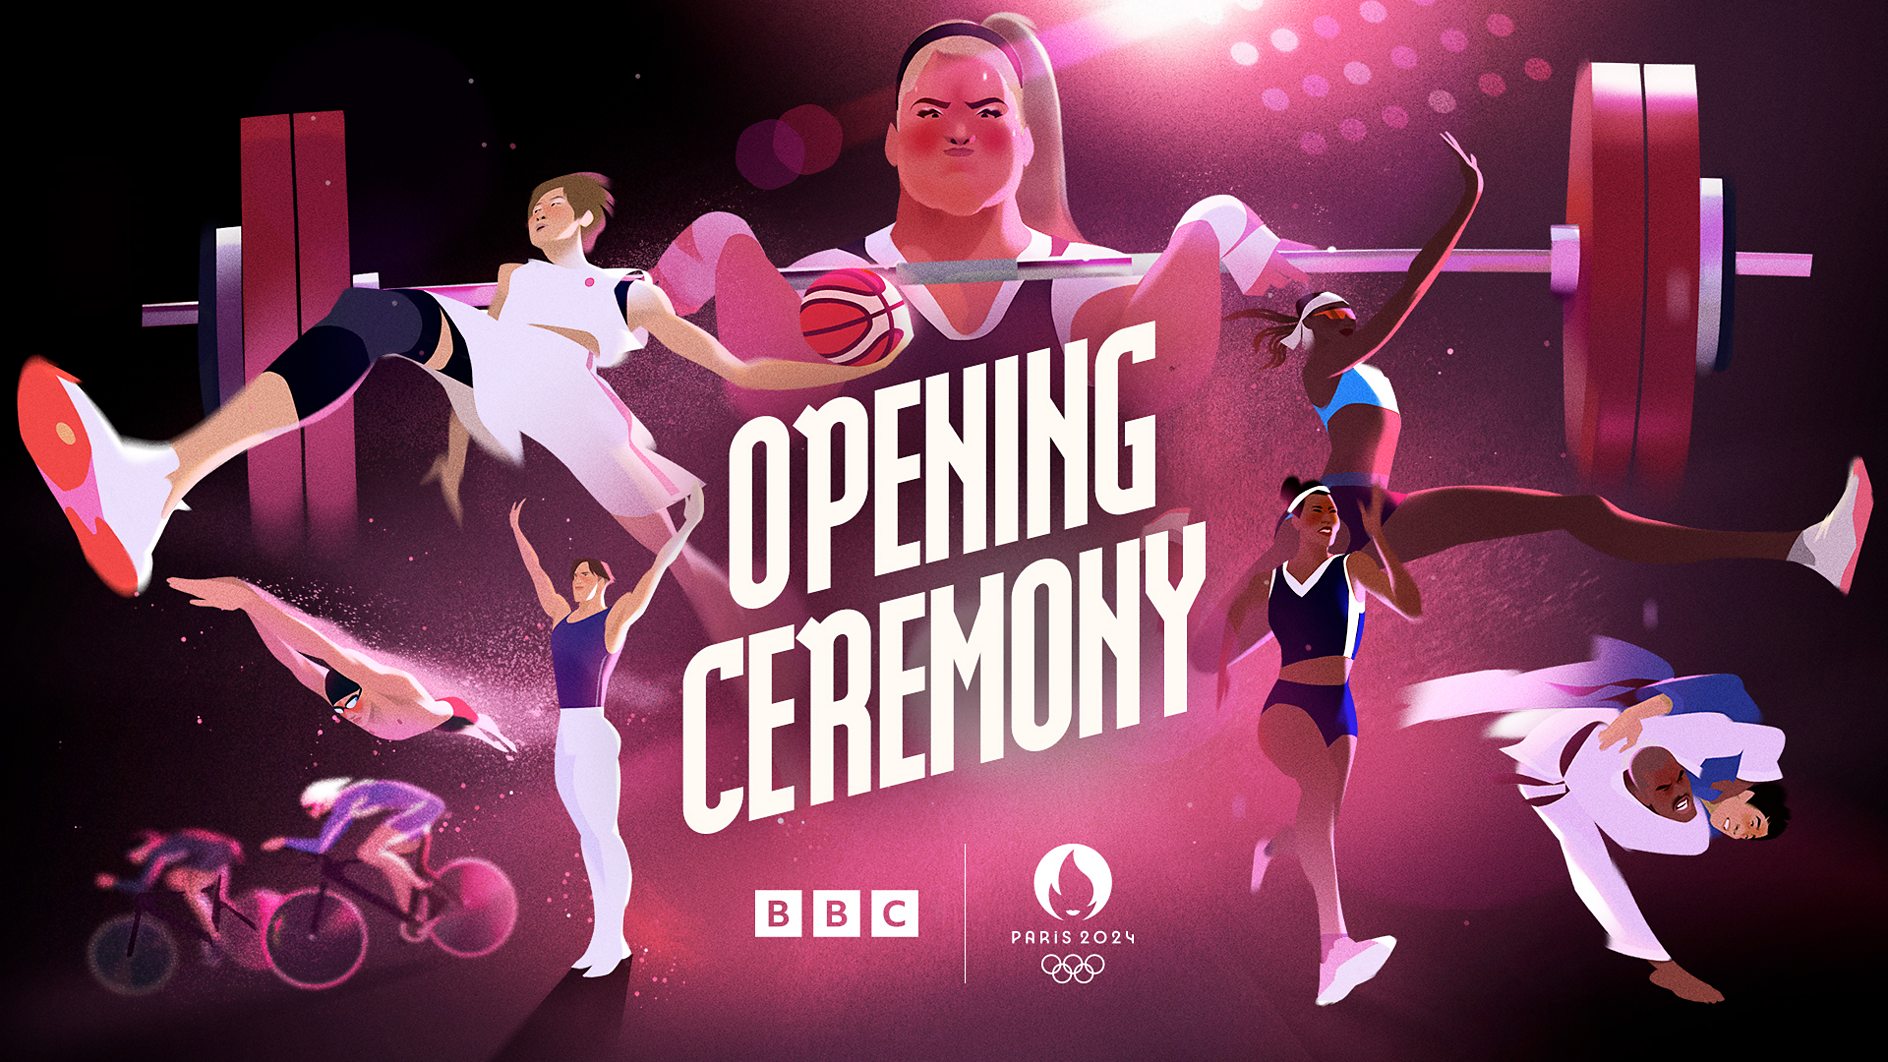 Olympic Games Paris 2024 Opening Ceremony - How to watch on TV and BBC iPlayer